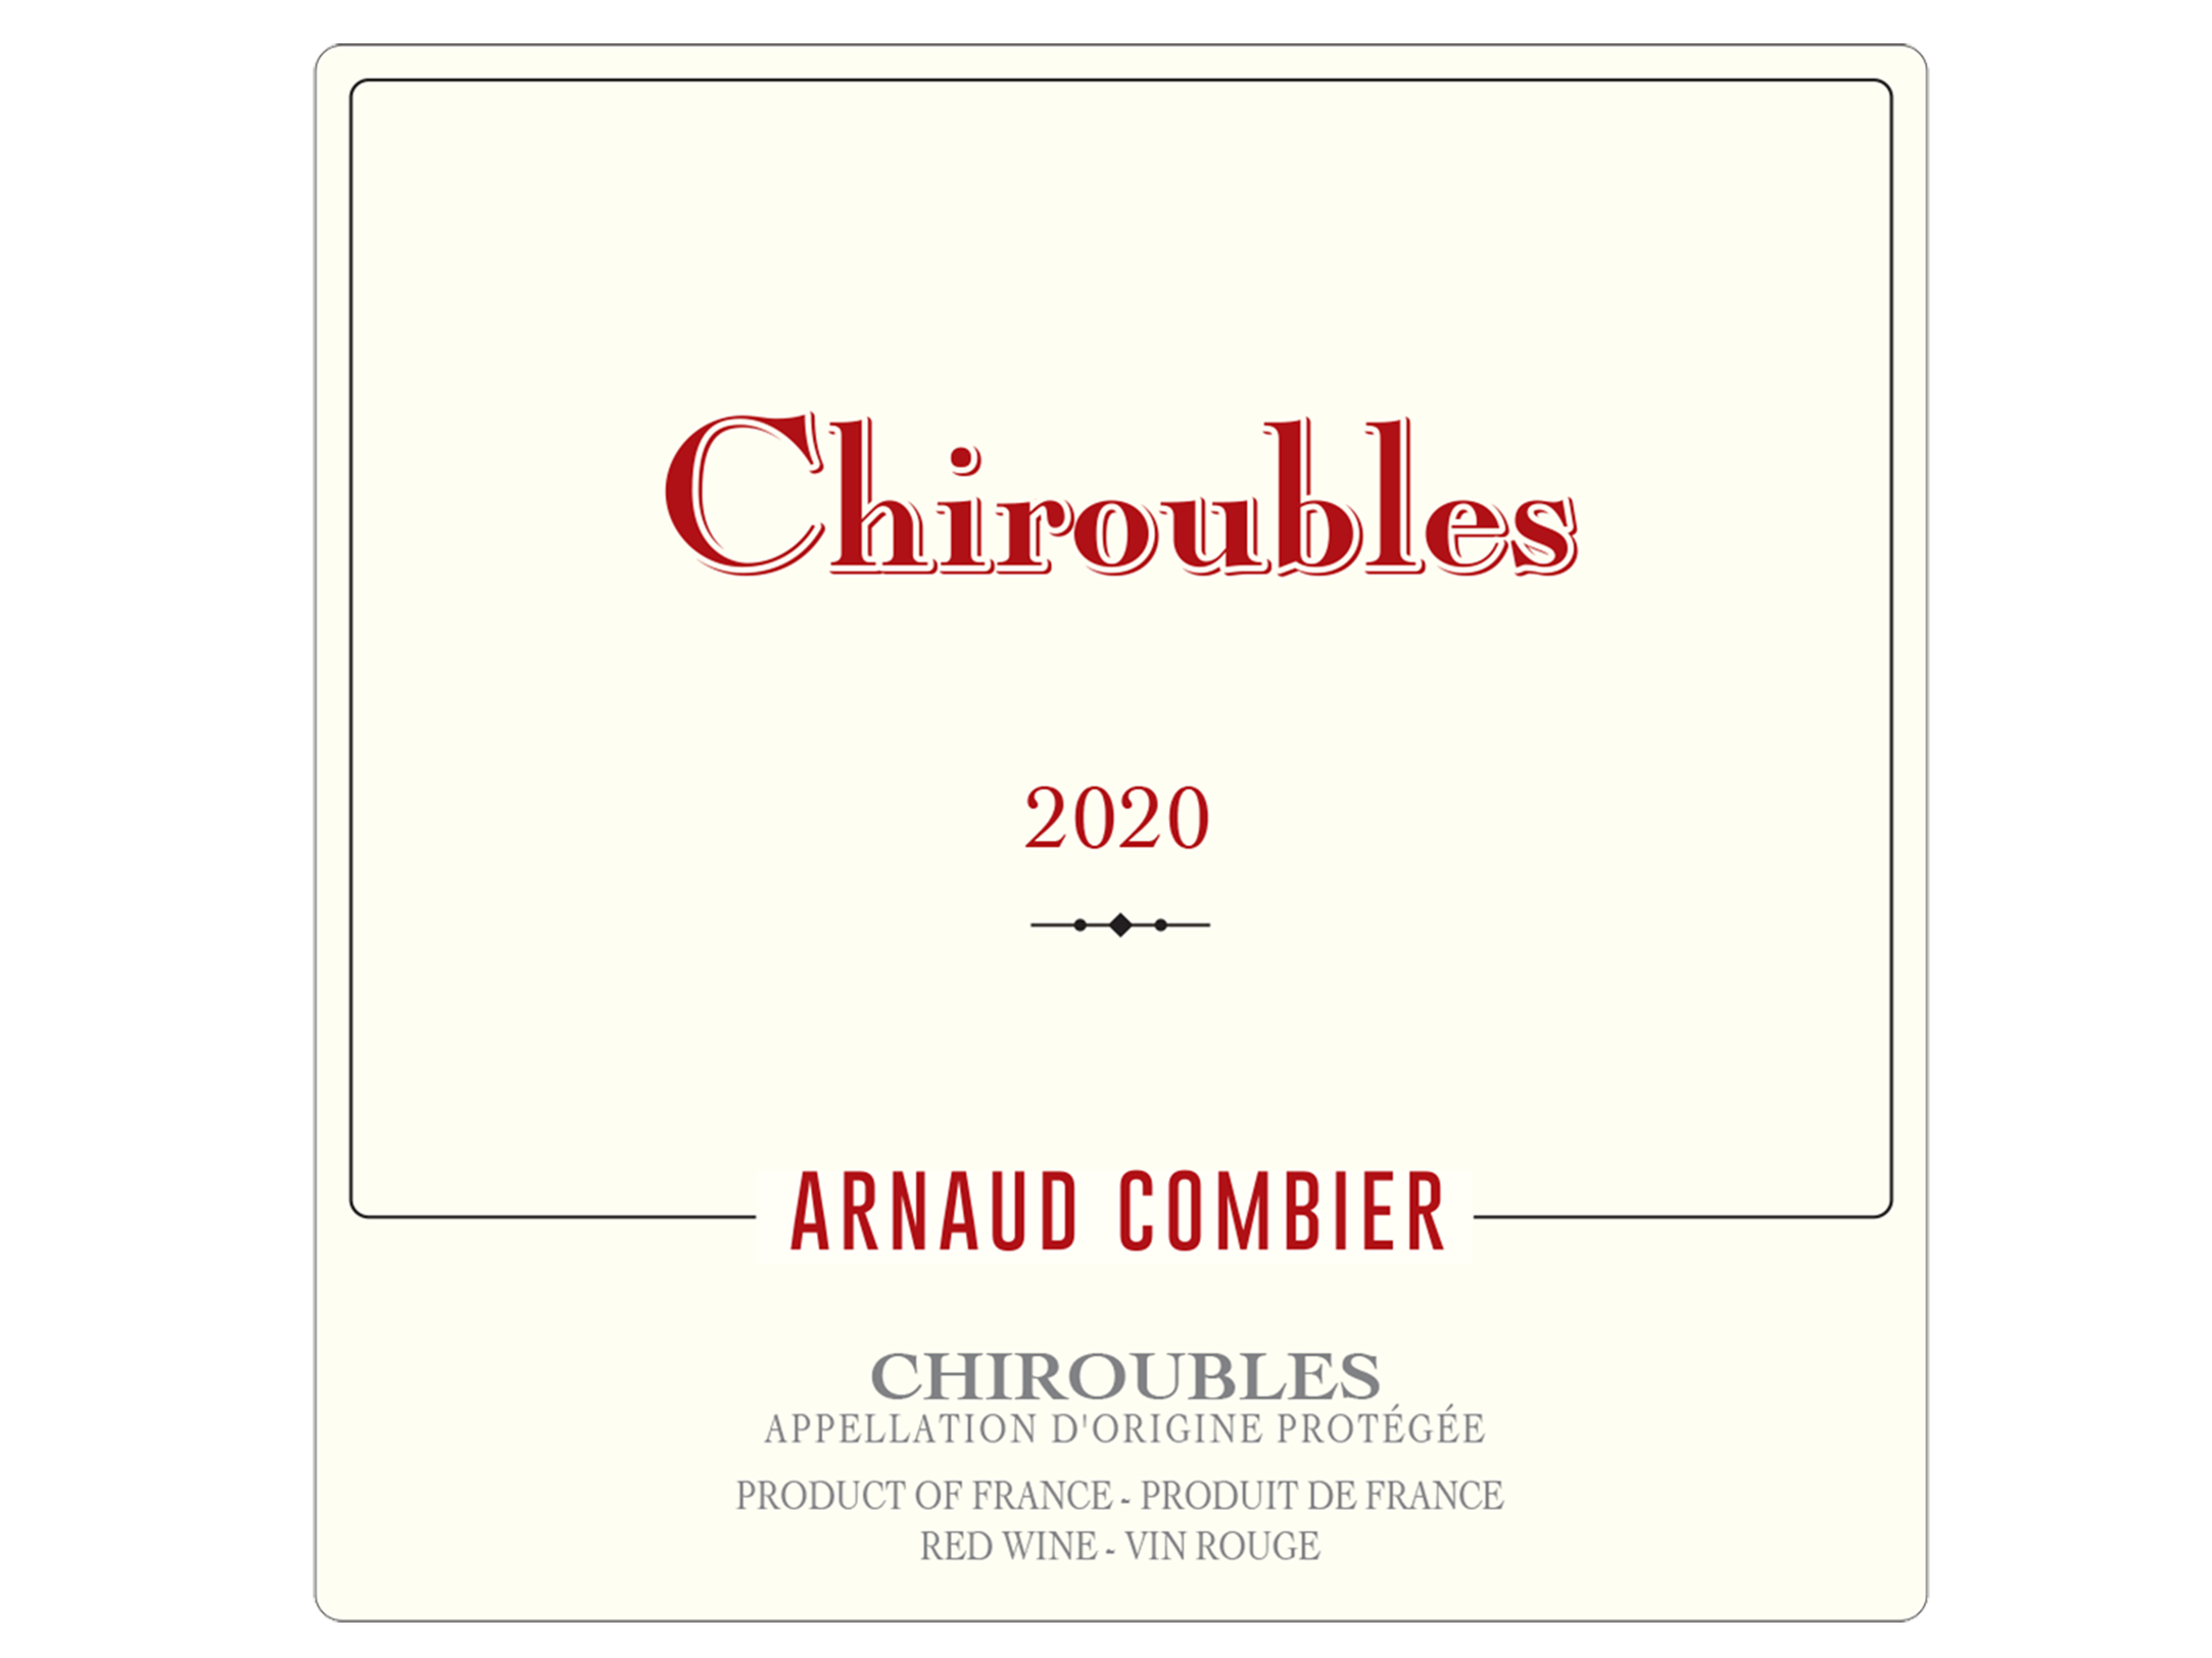 Chiroubles 2020